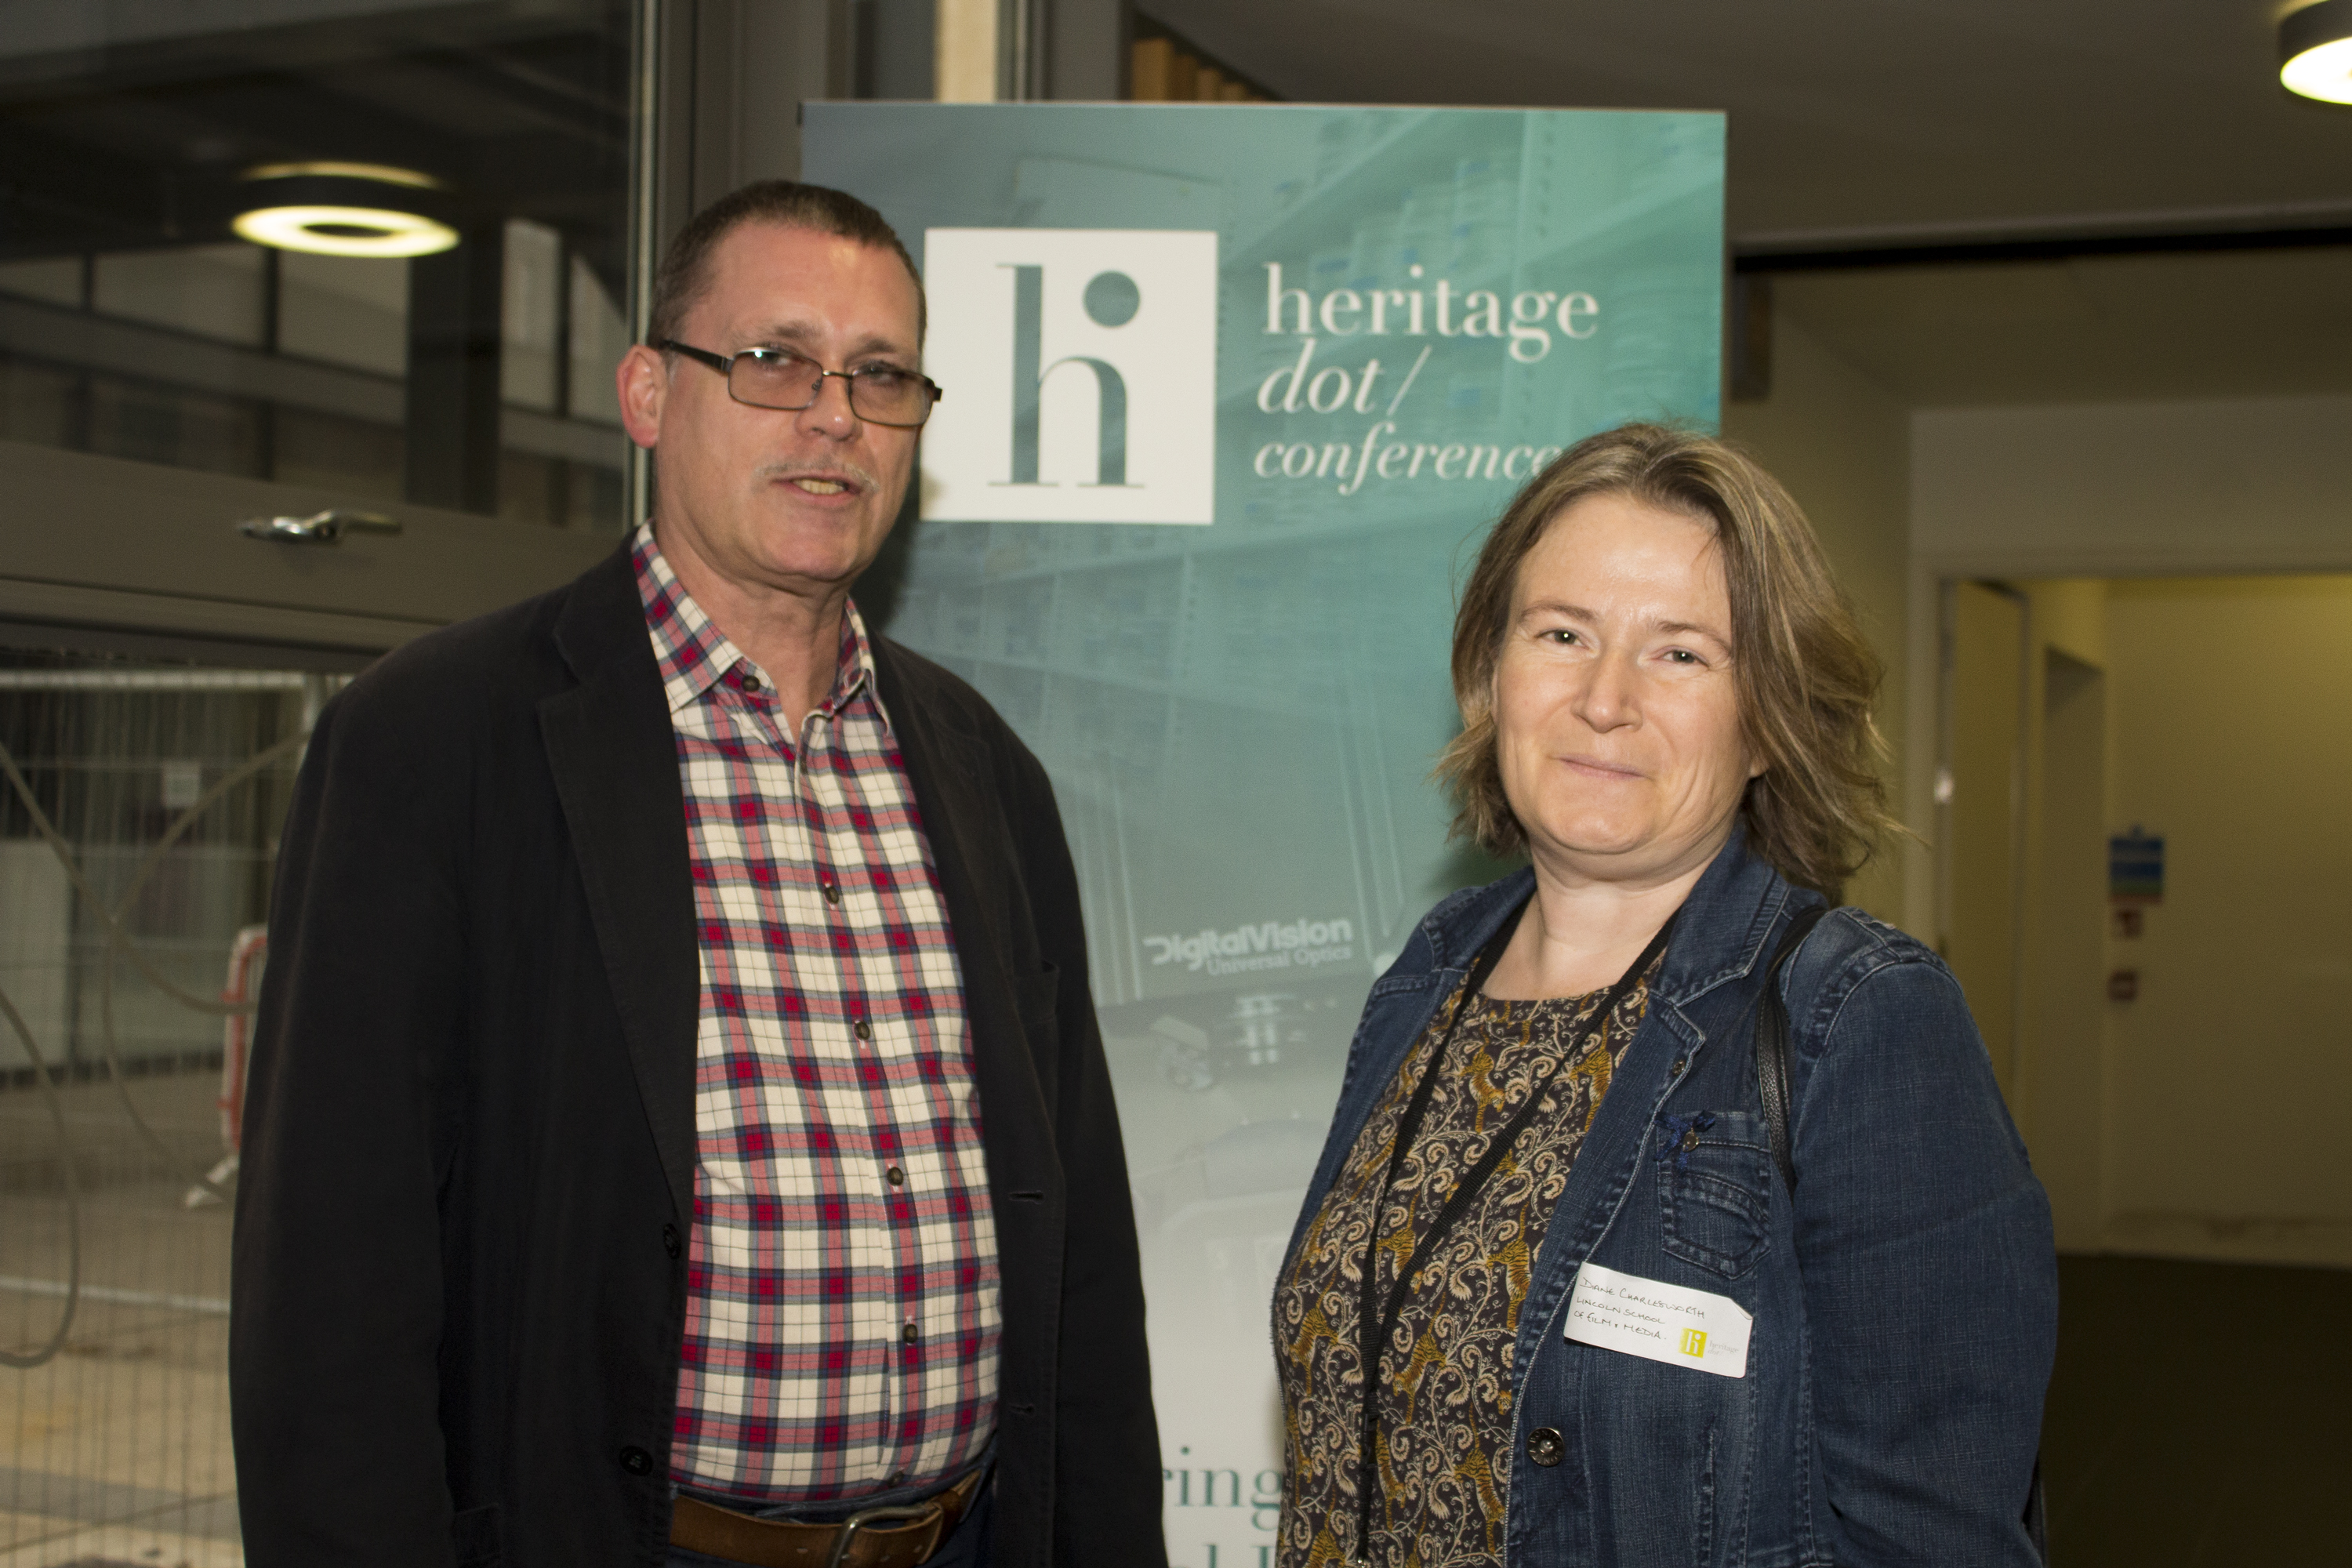 Heritage Dot conference goers in Lincoln discussing digital heritage and culture